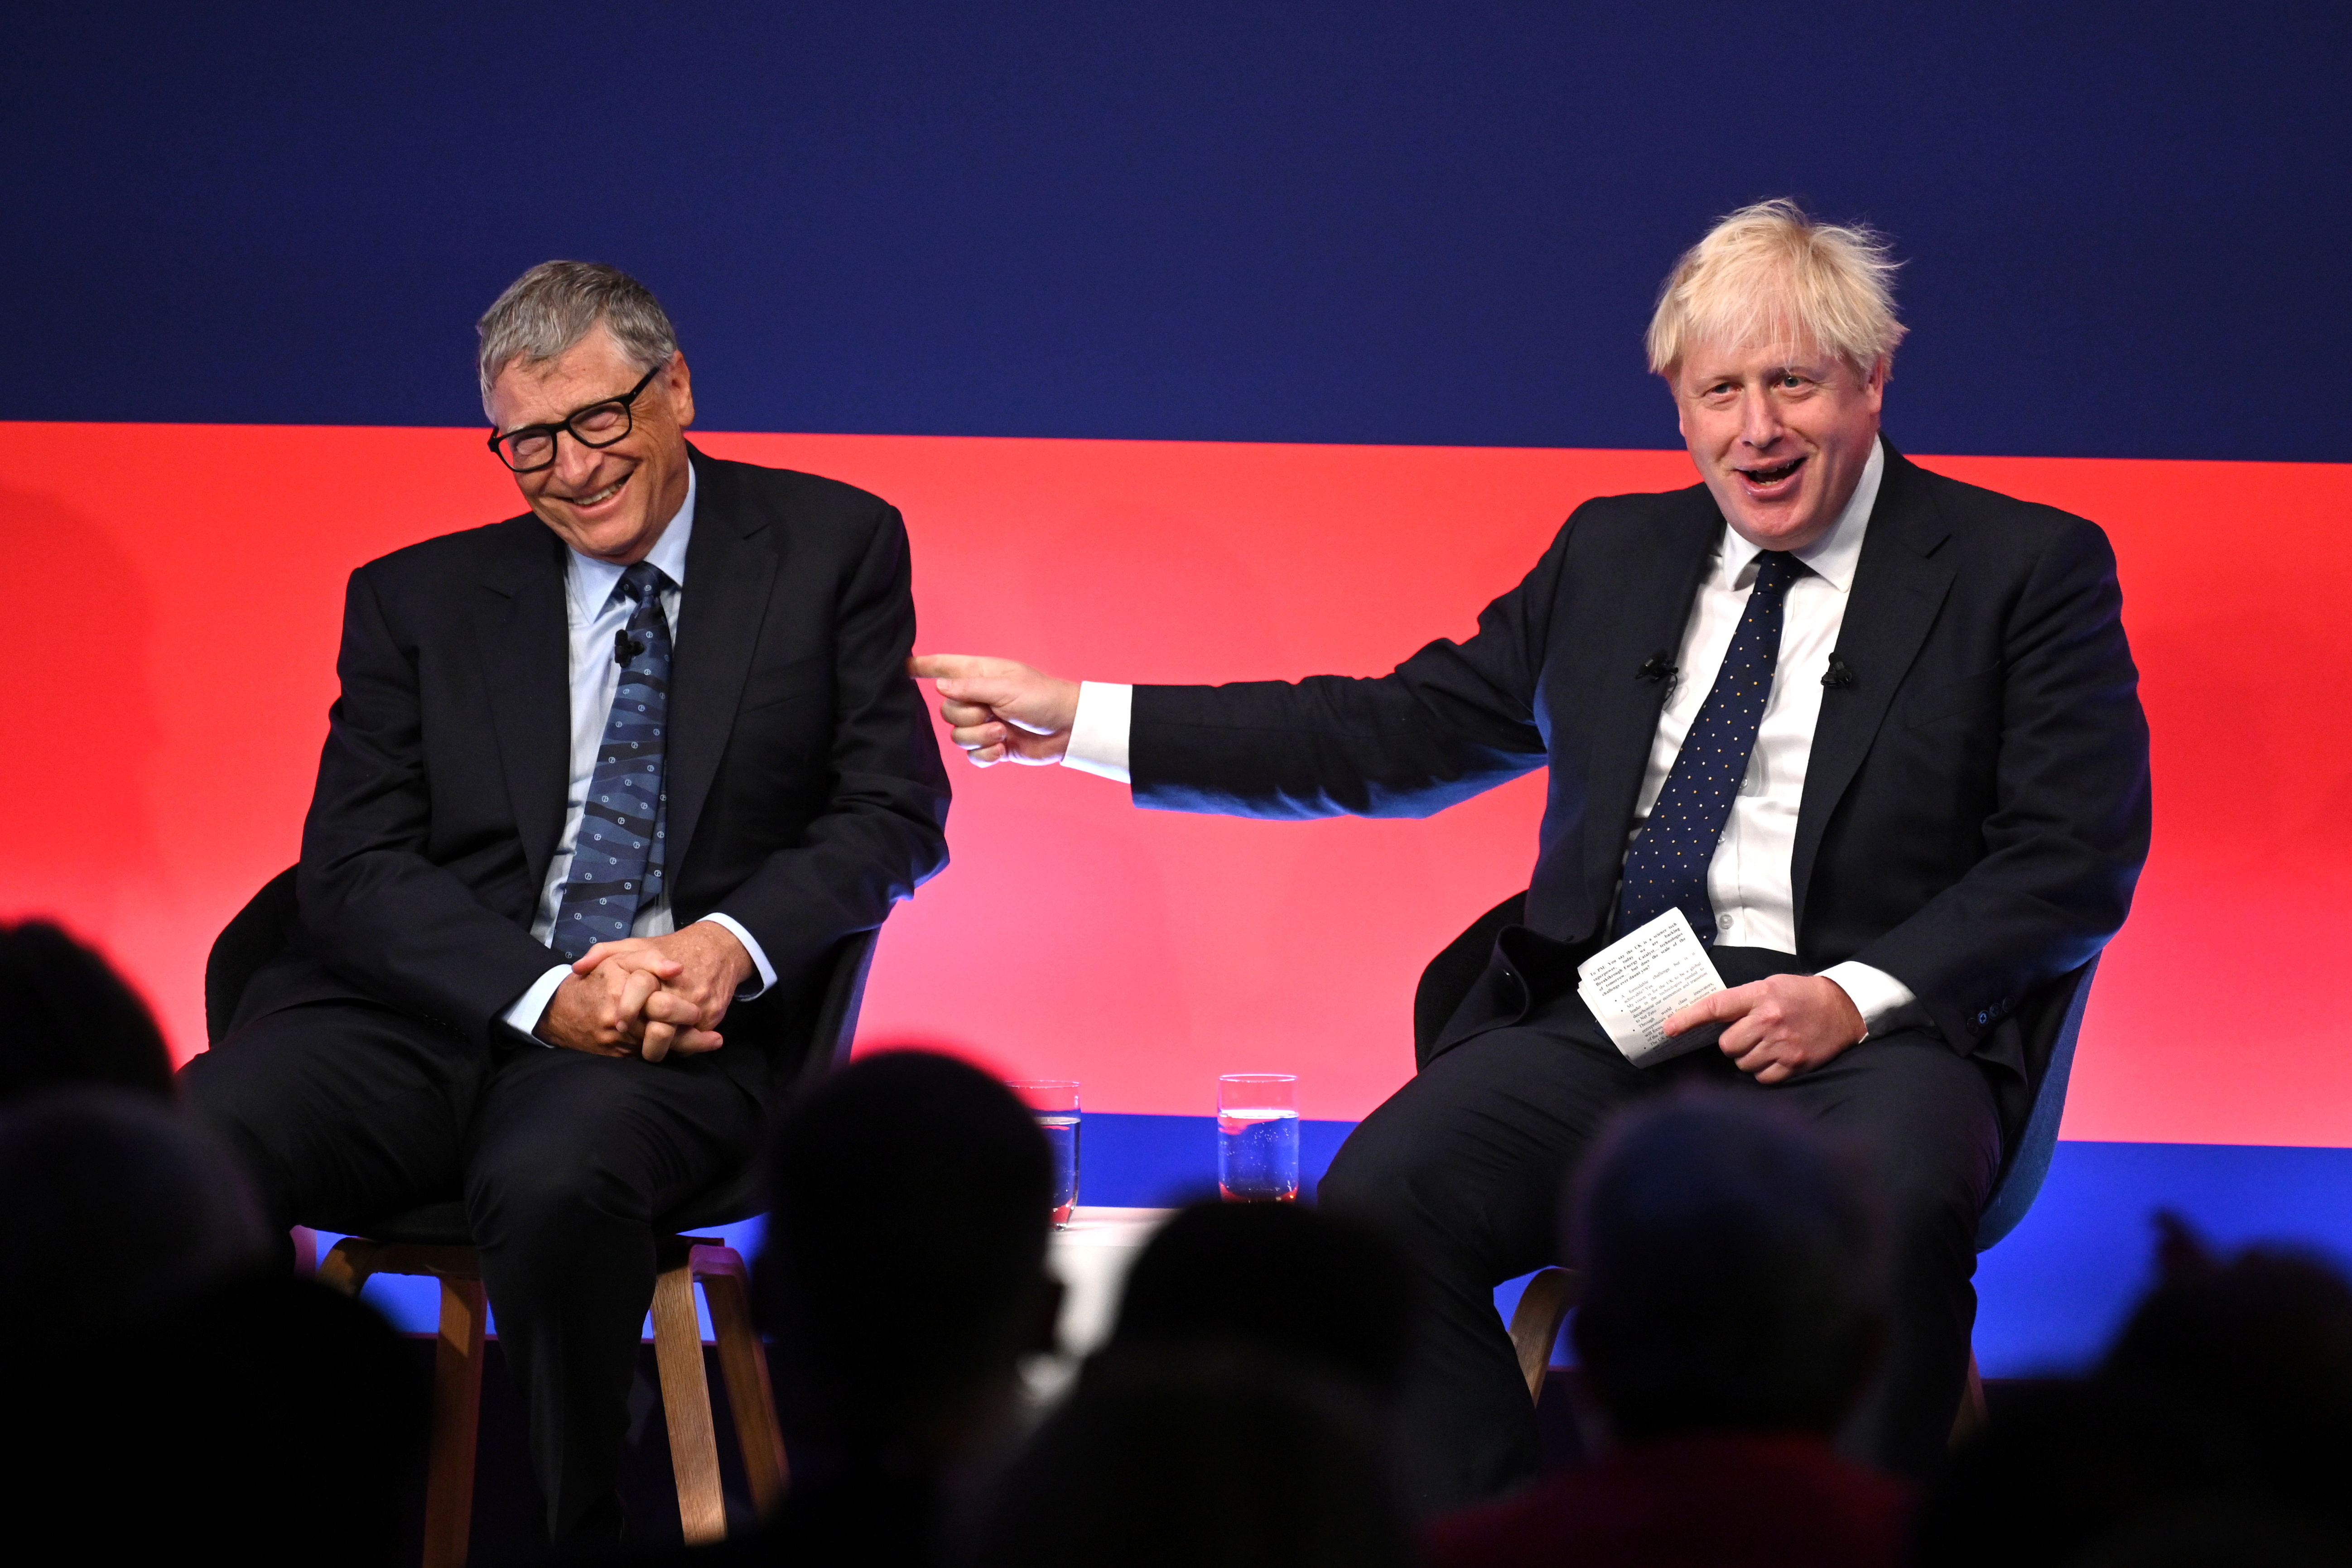 Britain's Prime Minister Boris Johnson appears on stage in conversation with Bill Gates during the Global Investment Summit at the Science Museum, in London, Britain, October 19, 2021. Leon Neal/Pool via REUTERS